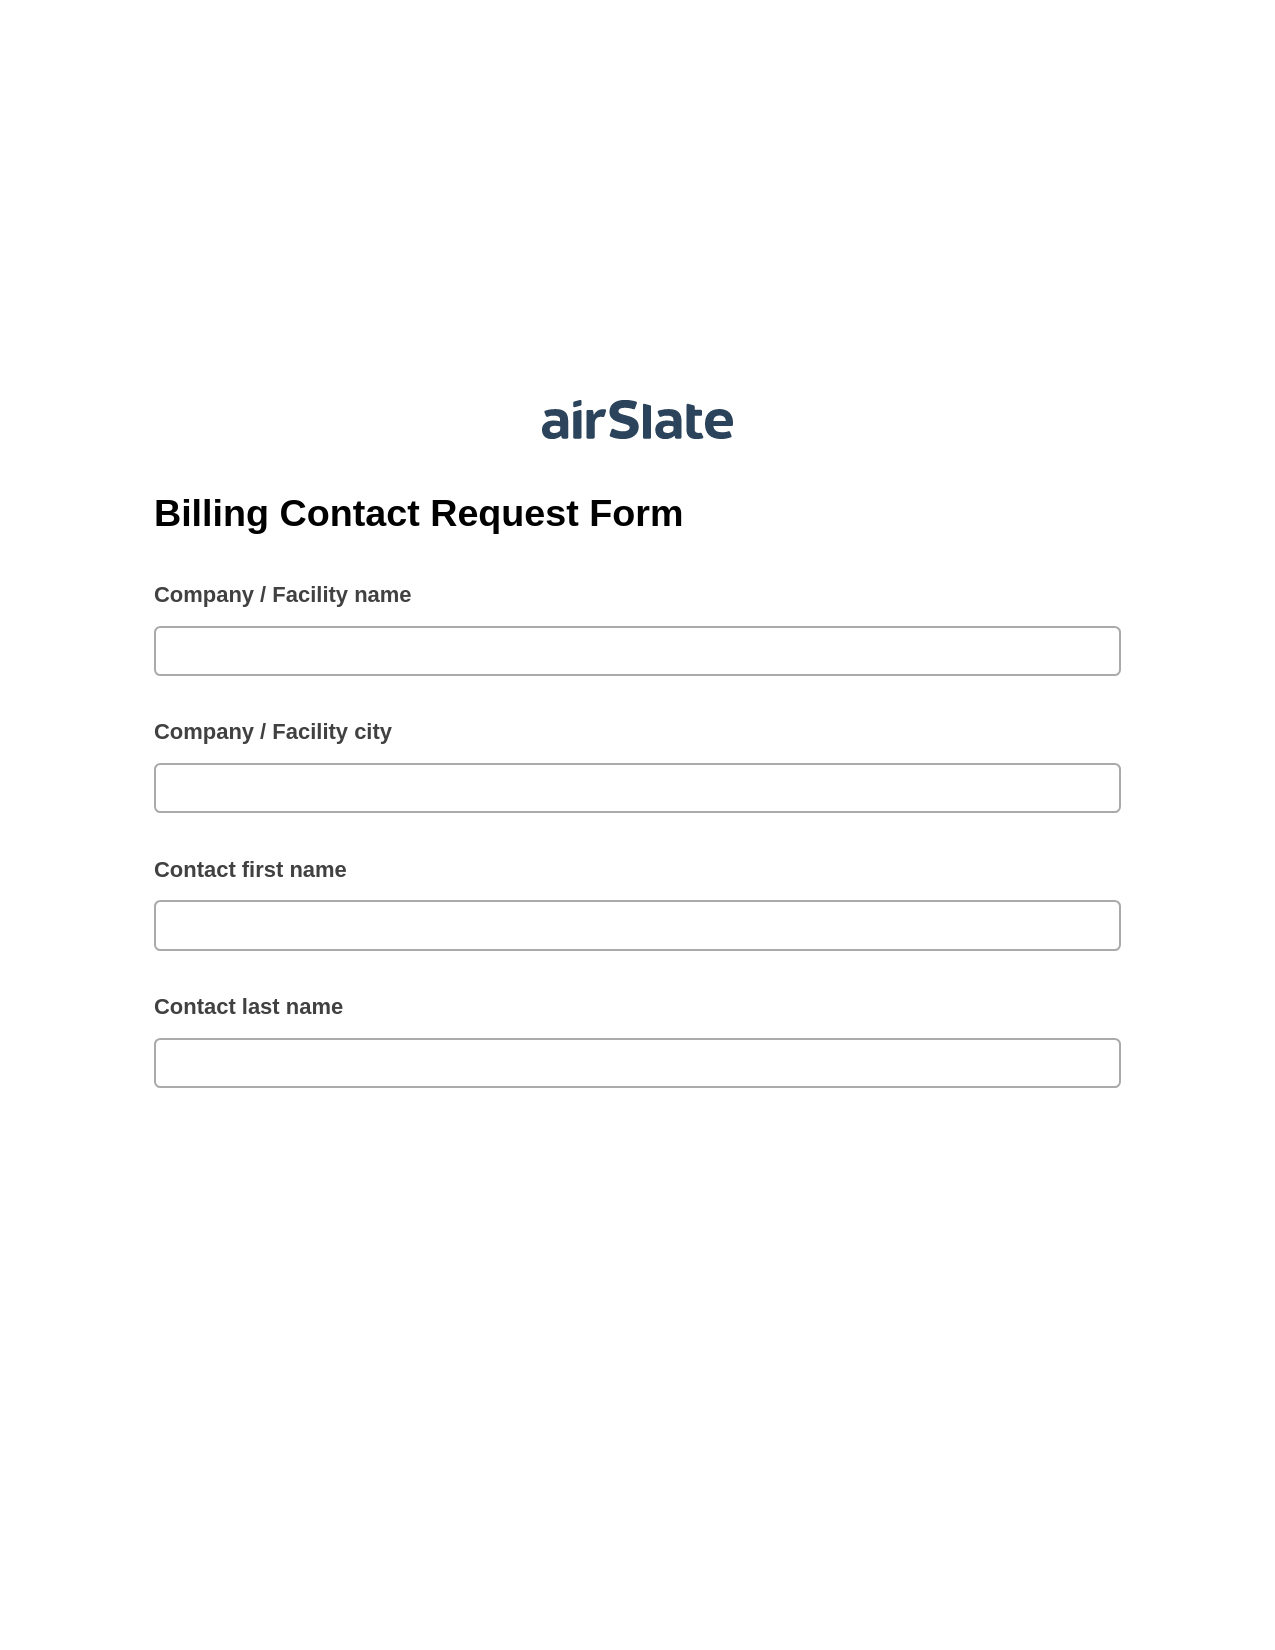 Multirole Billing Contact Request Form Pre-fill from NetSuite Records Bot, Create NetSuite Records Bot, Webhook Postfinish Bot